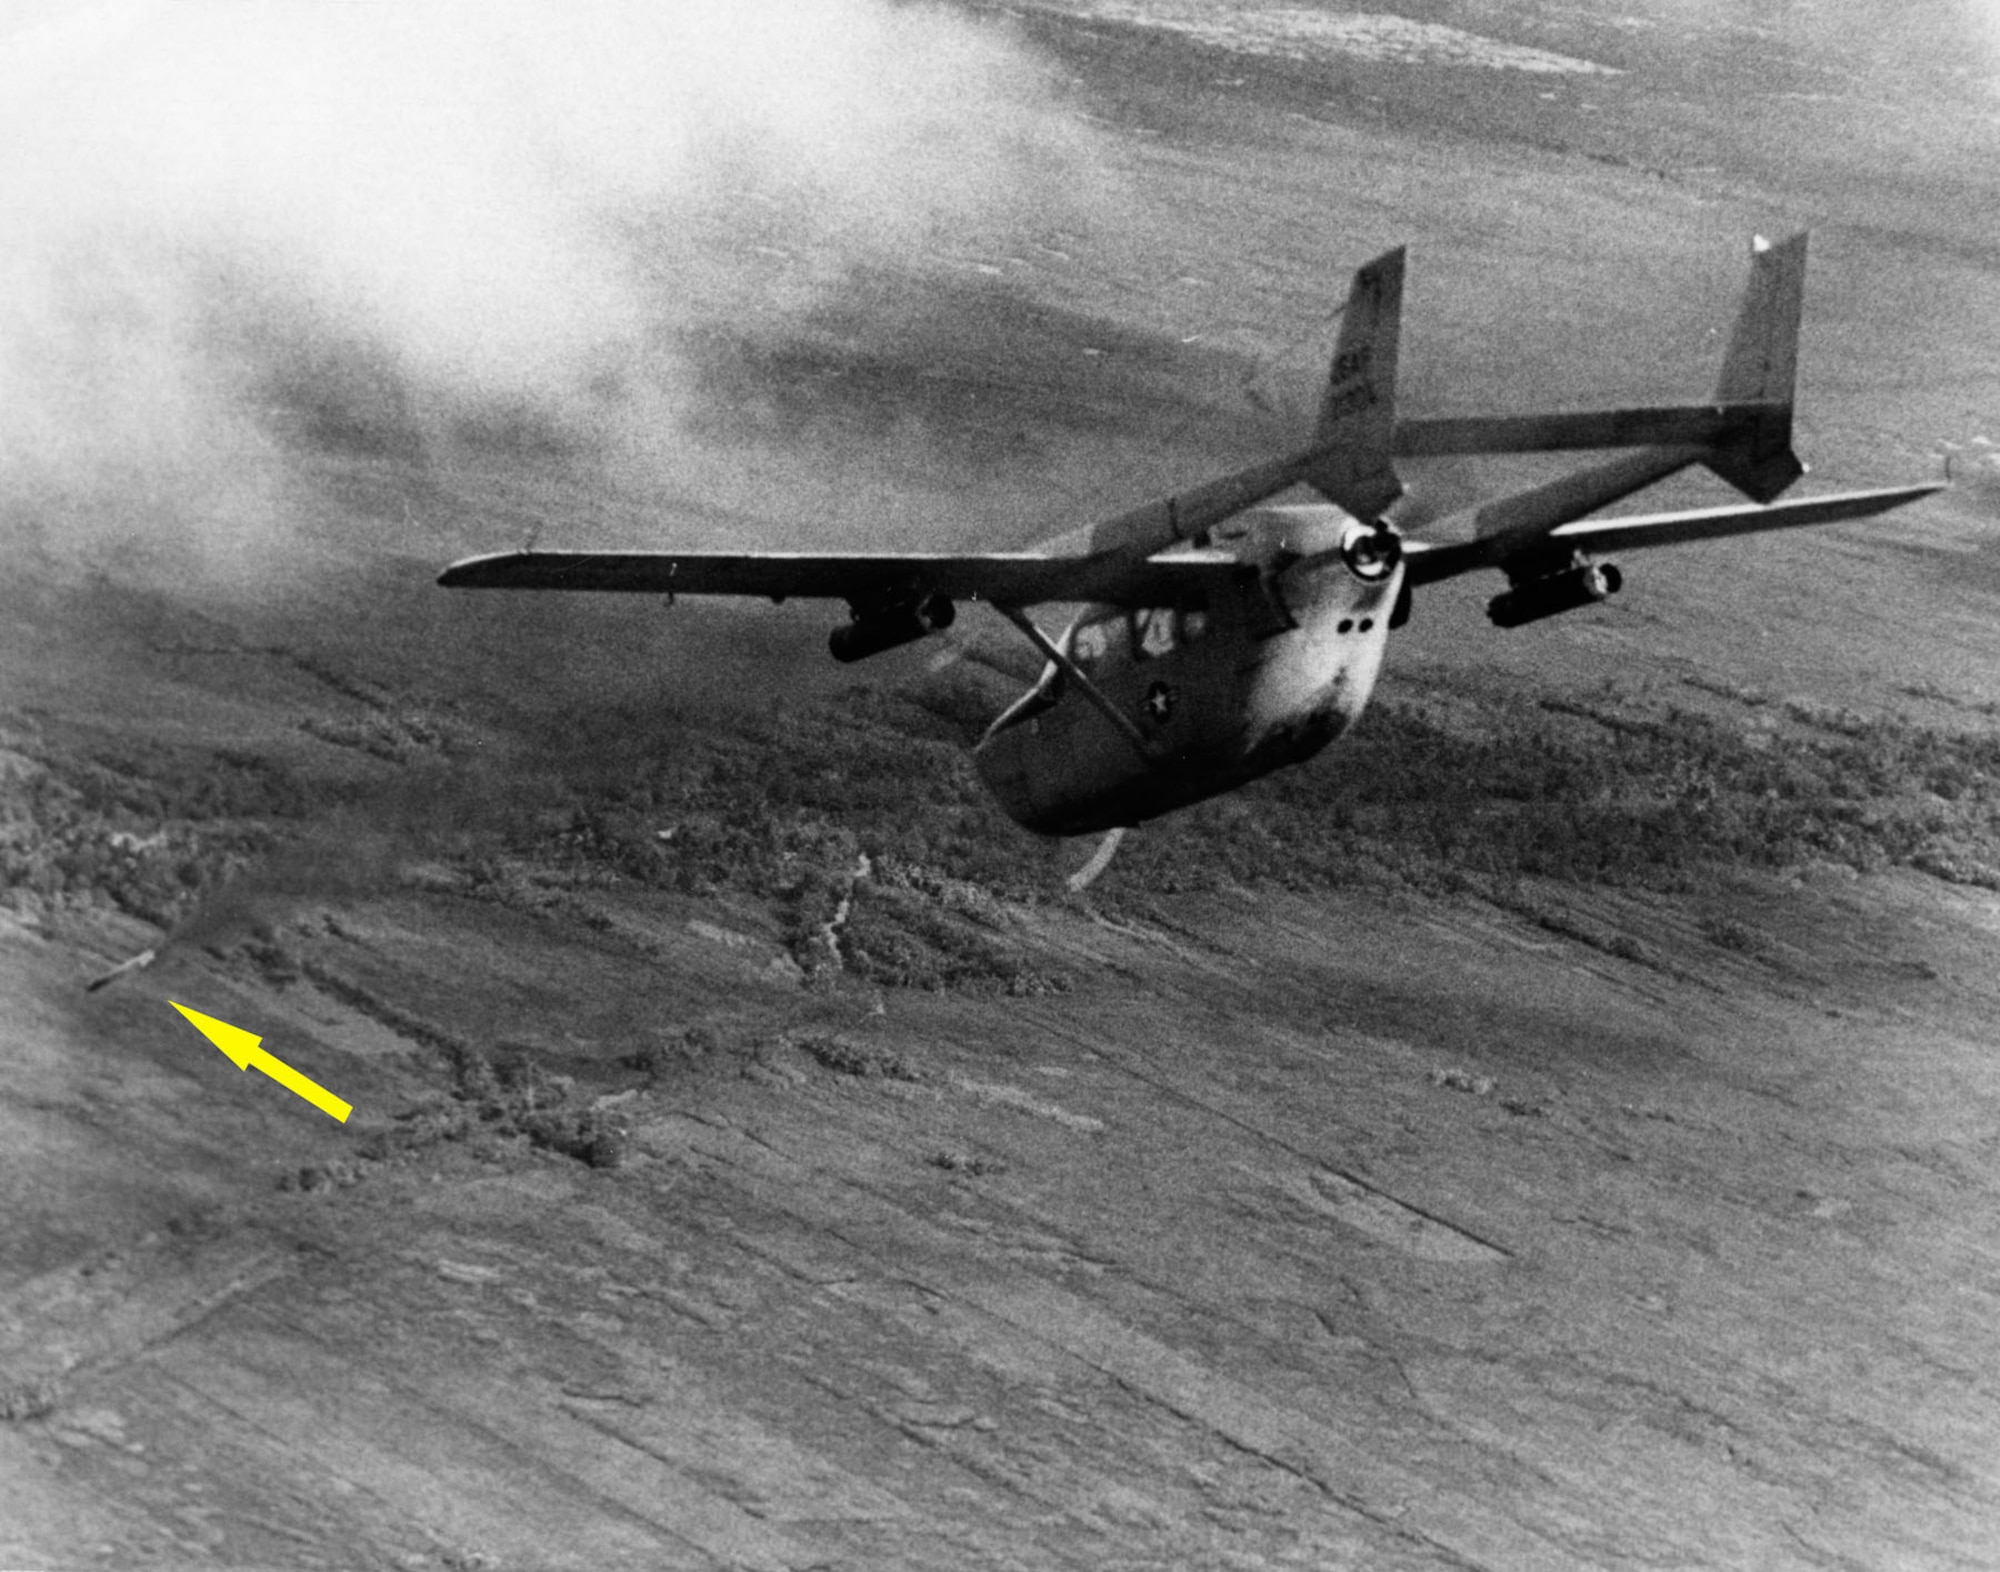 The Cessna O-2A Super Skymaster was used as an interim FAC aircraft and for psychological warfare missions. Here, an O-2A FAC fires a smoke rocket (indicated by the arrow) to mark an enemy stronghold for strike aircraft. (U.S. Air Force photo)